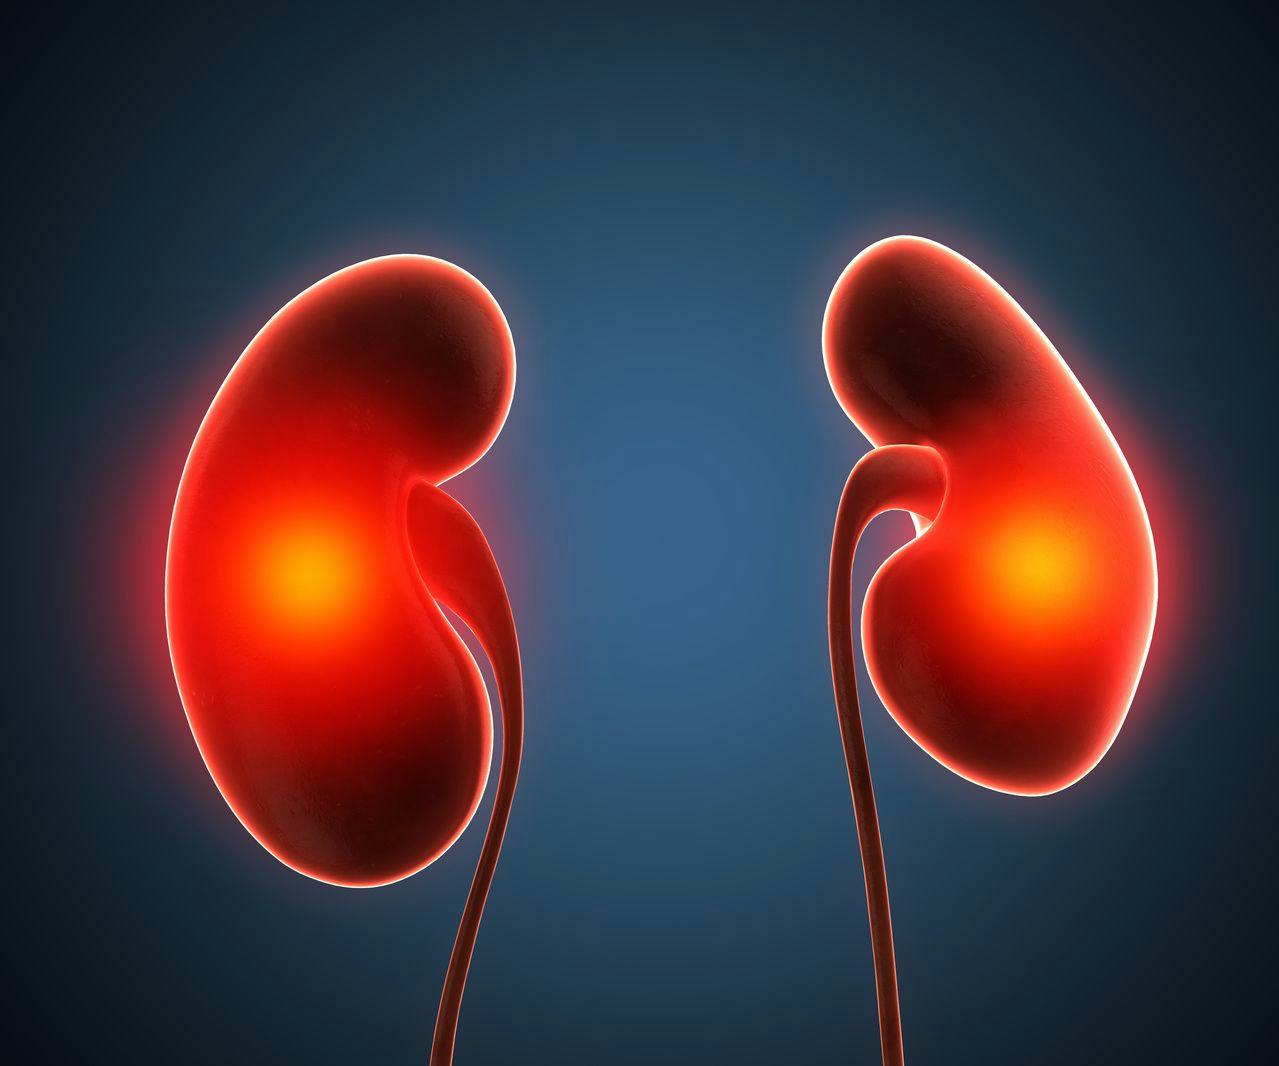 Study Finds Rituximab Noninferior to Cyclosporine for Membranous Nephropathy